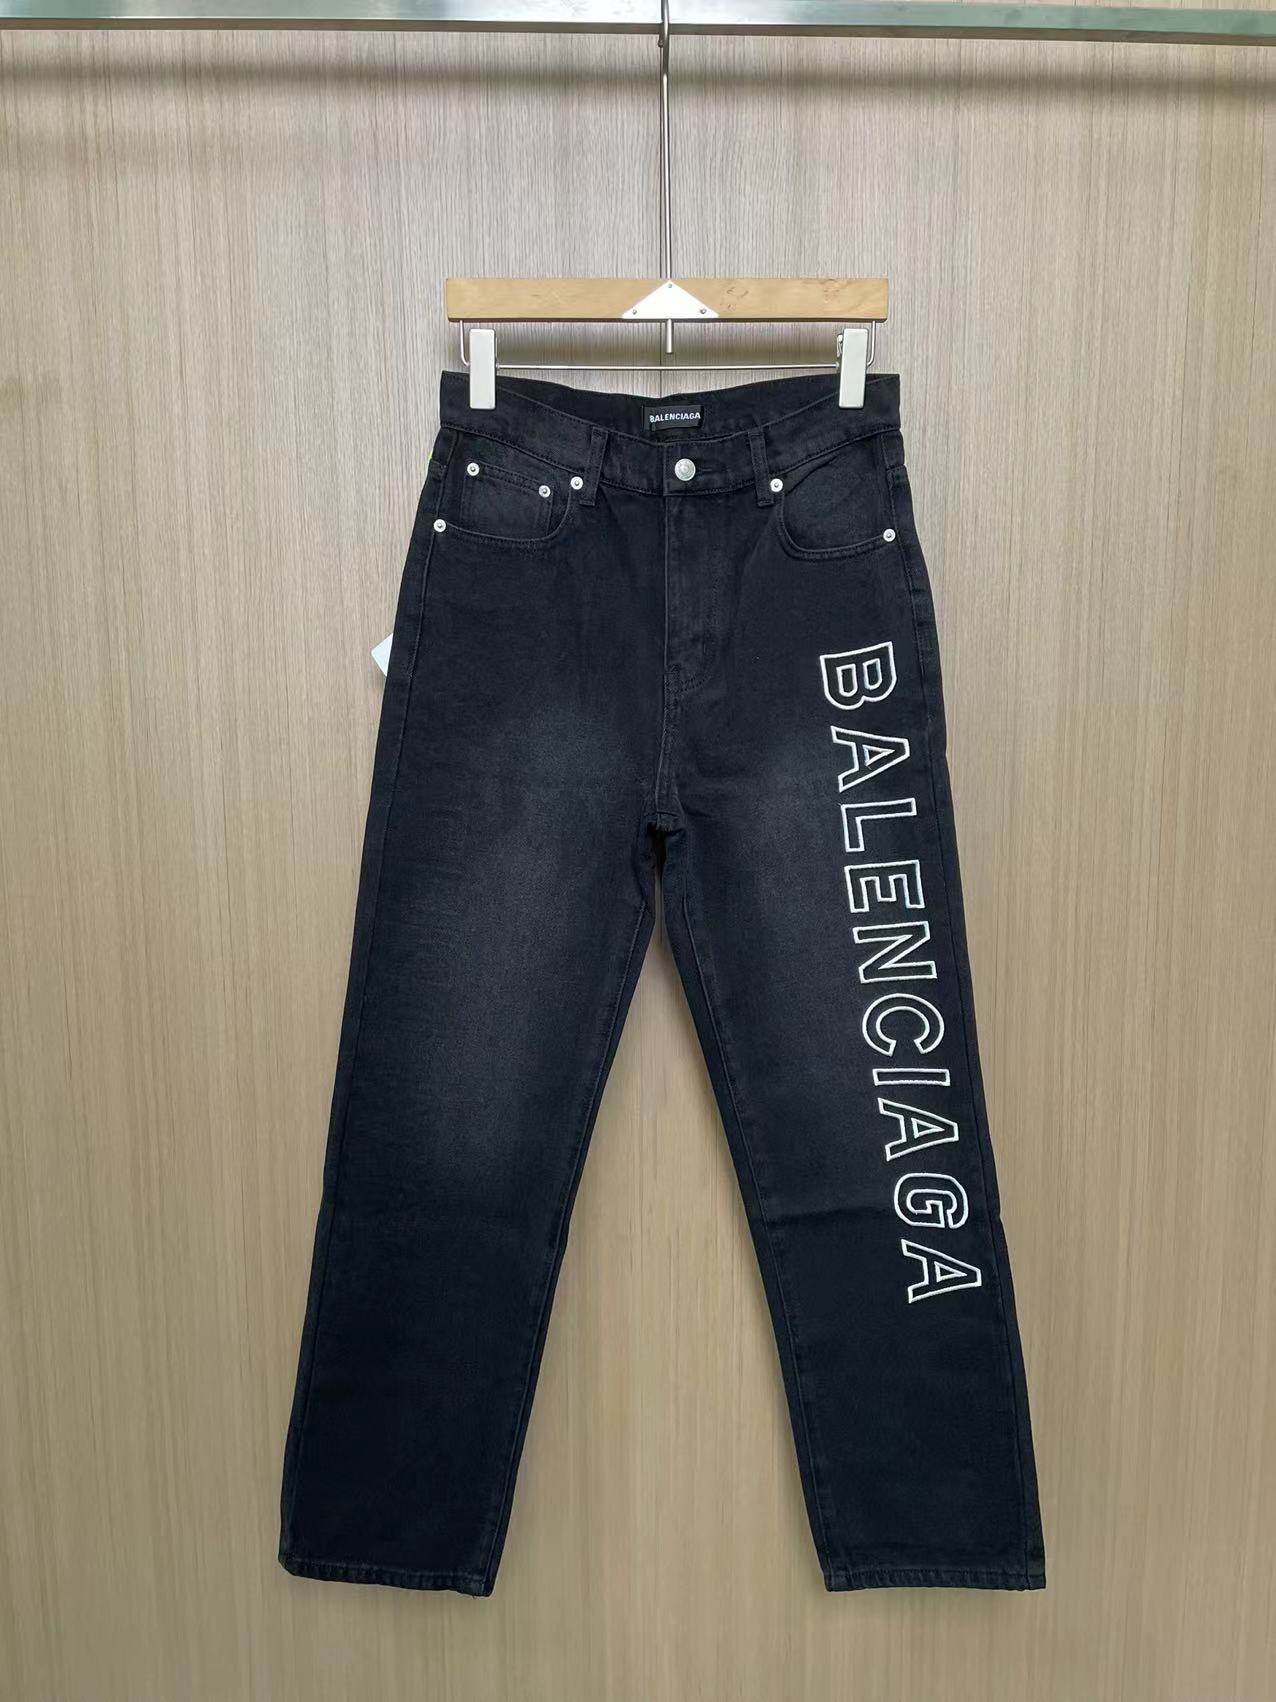 Balenciaga Clothing Jeans Pants & Trousers Black Embroidery Unisex